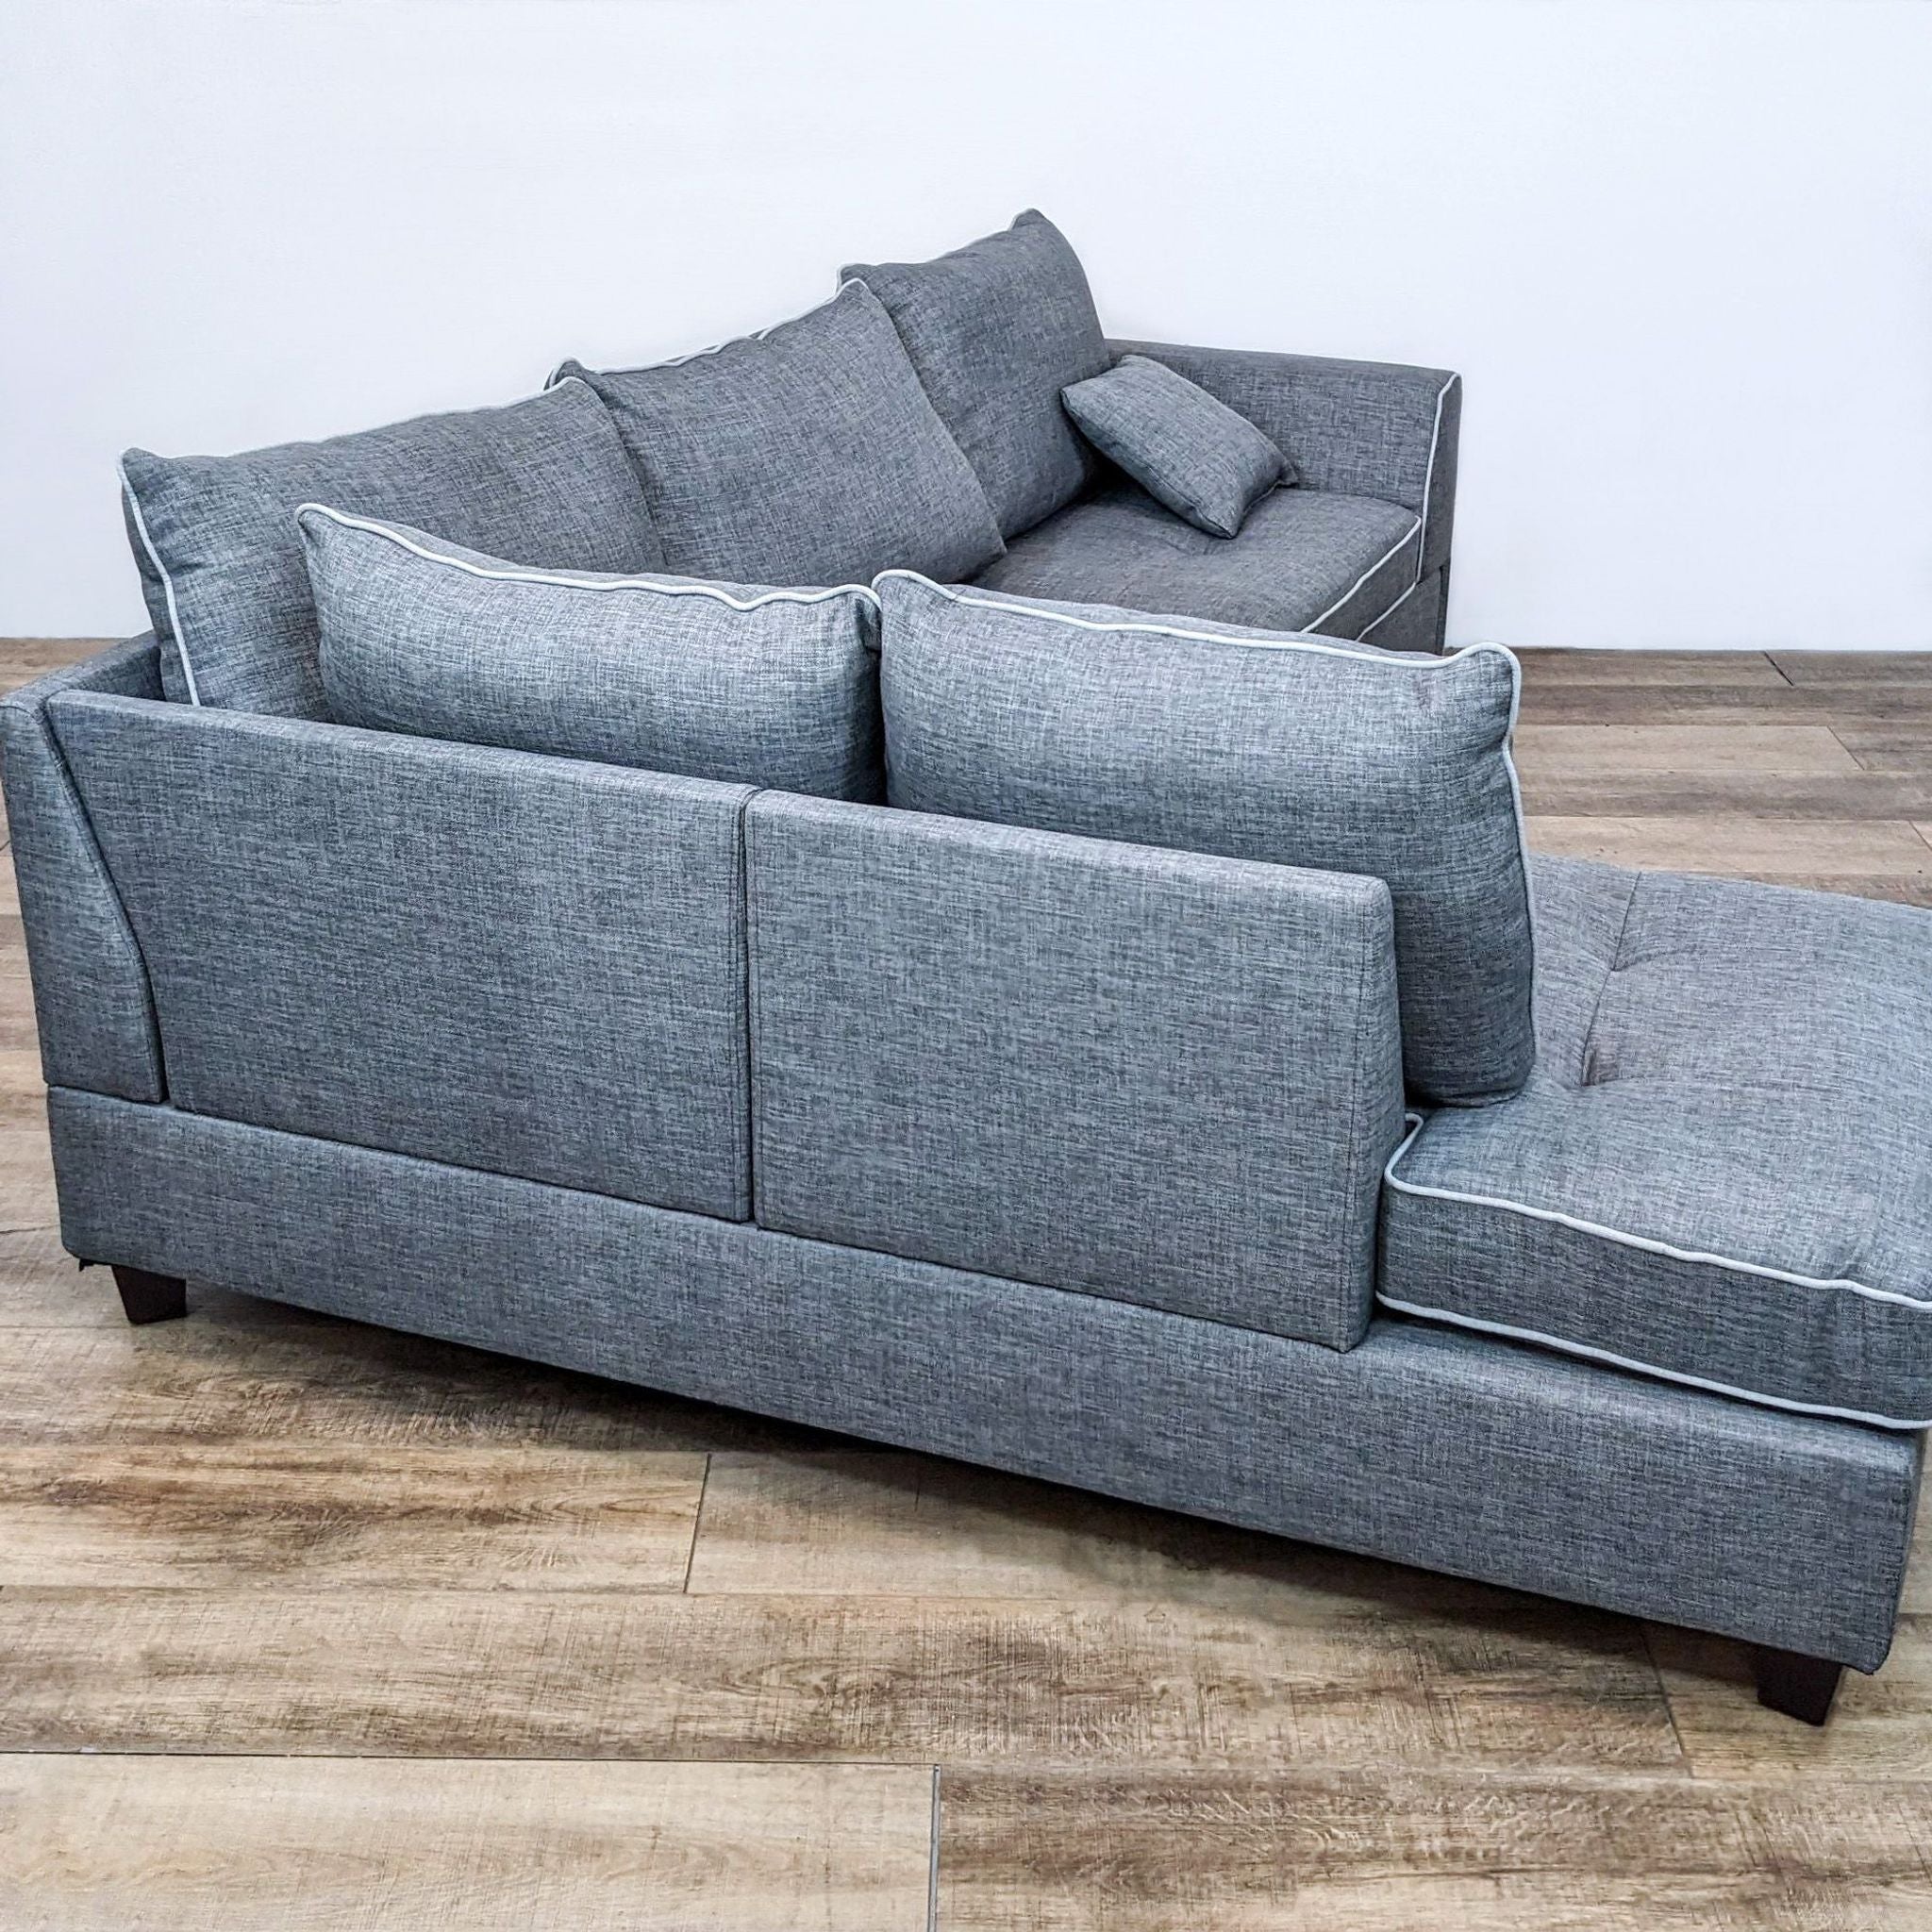 Side view of a Reperch gray fabric sectional with accent pillows and dark finished legs, showing the profile design.